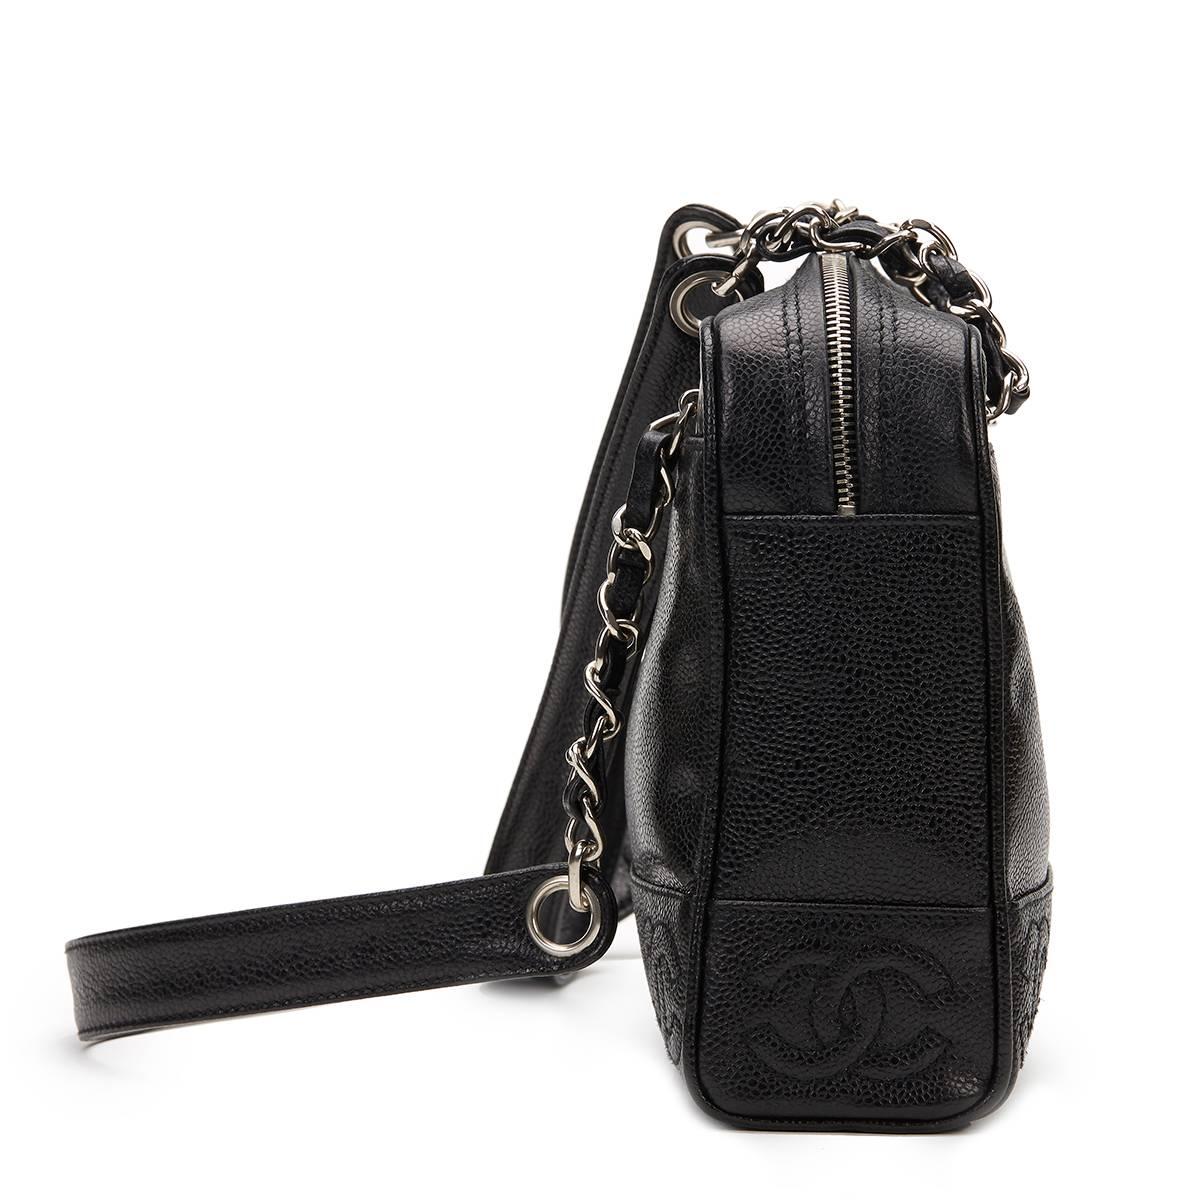 CHANEL
Black Caviar Leather Vintage Timeless Logo Trim Shoulder Bag

 Reference: HB898
Serial Number: 4558290
Age (Circa): 1996
Accompanied By: Chanel Dust Bag, Box, Authenticity Card, Care Booklet
Authenticity Details: Authenticity Card, Serial